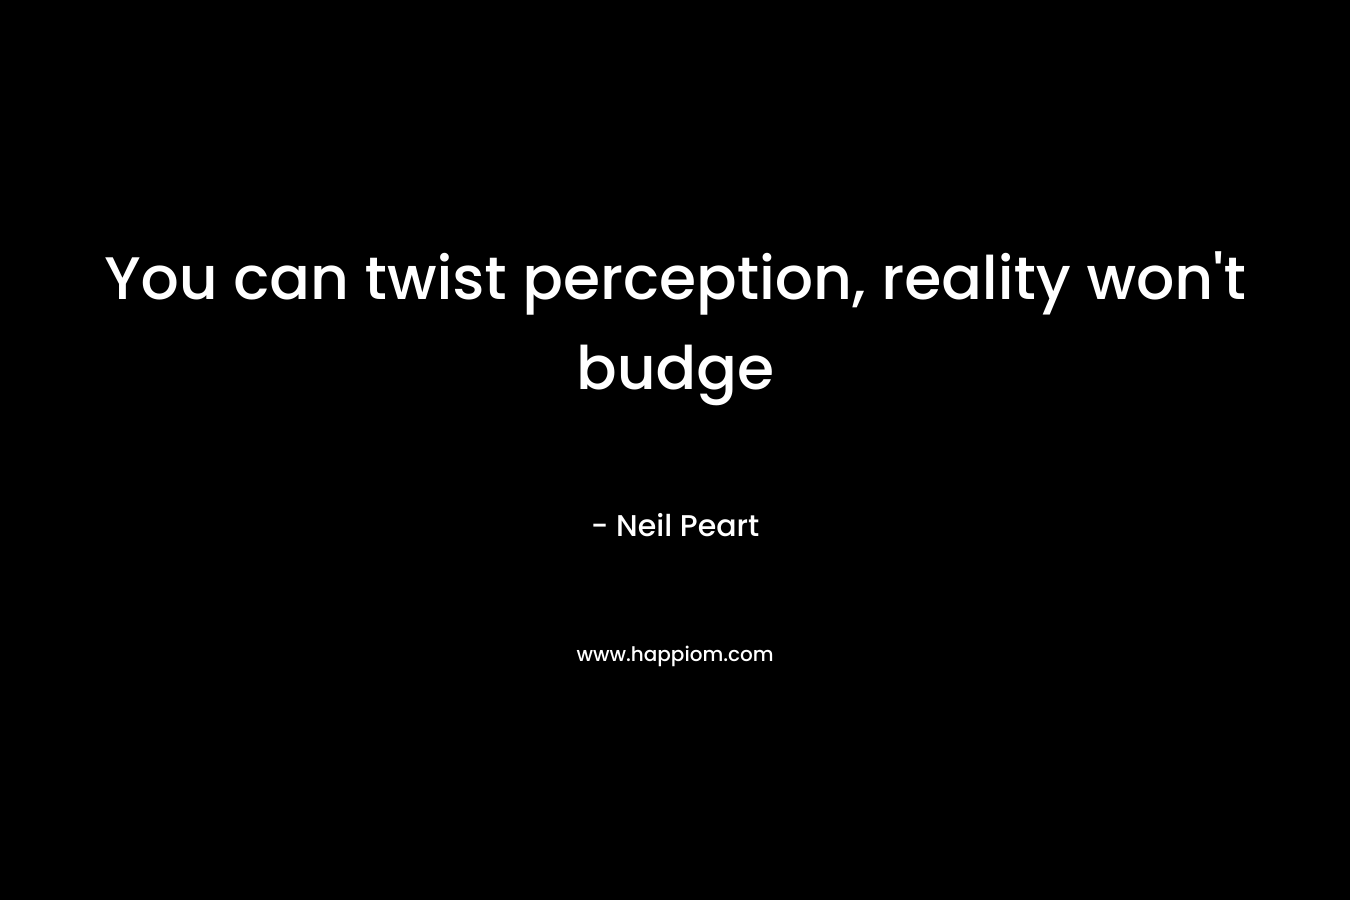 You can twist perception, reality won’t budge – Neil Peart